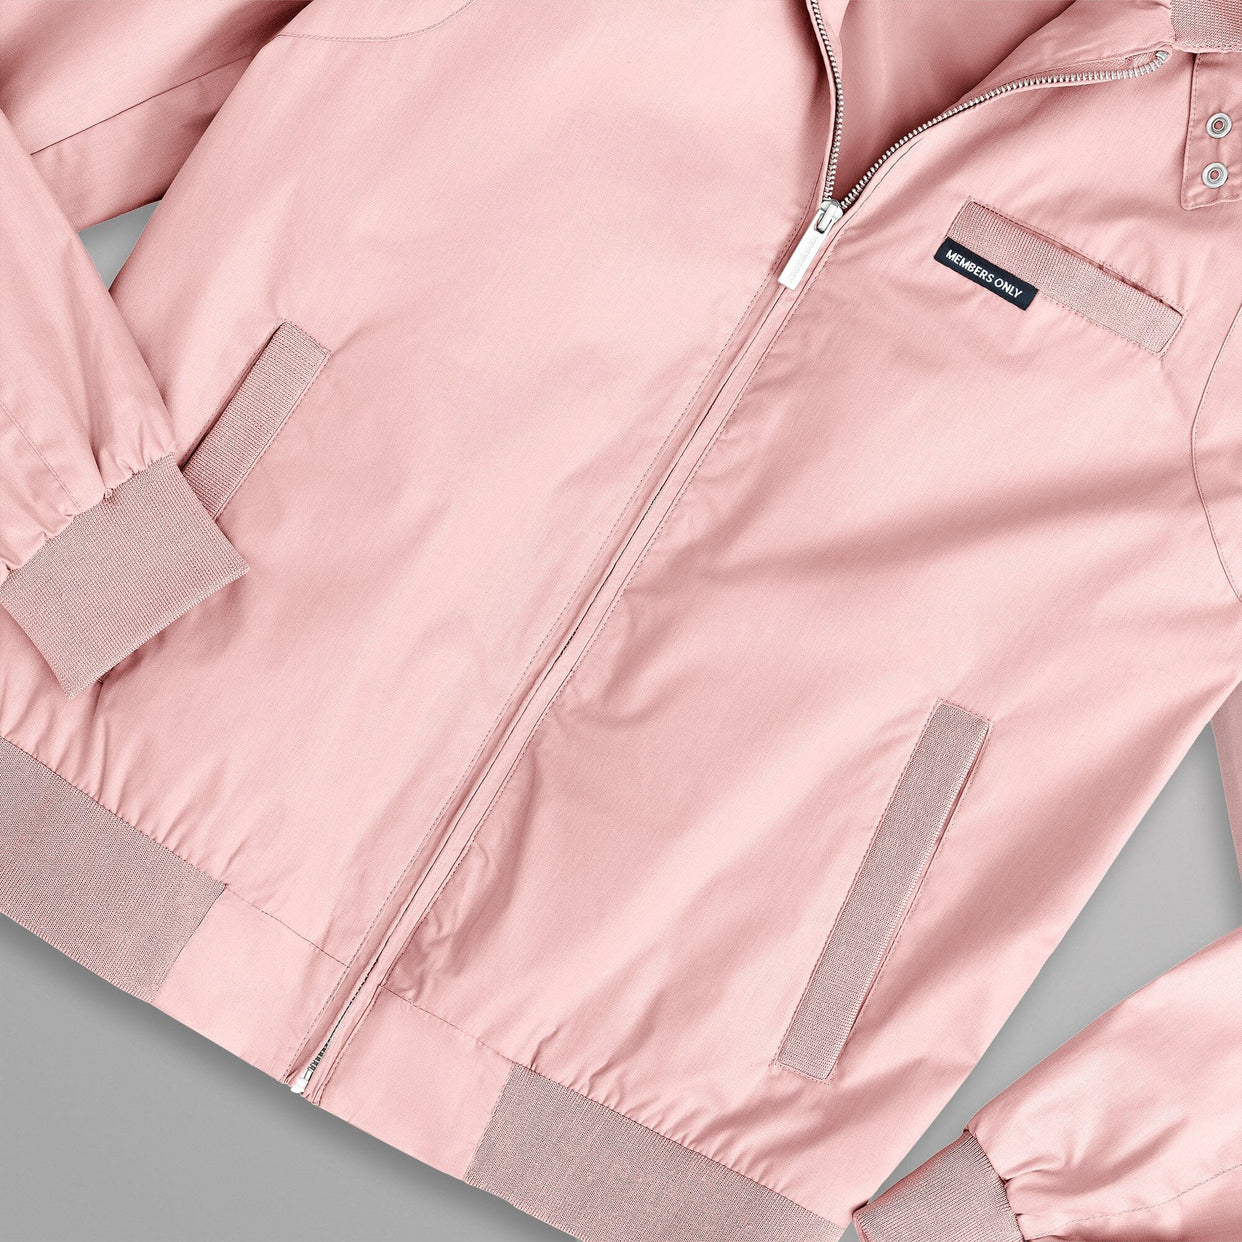 Members Only Members Only Oversized Pride Jacket - Light Pink - X